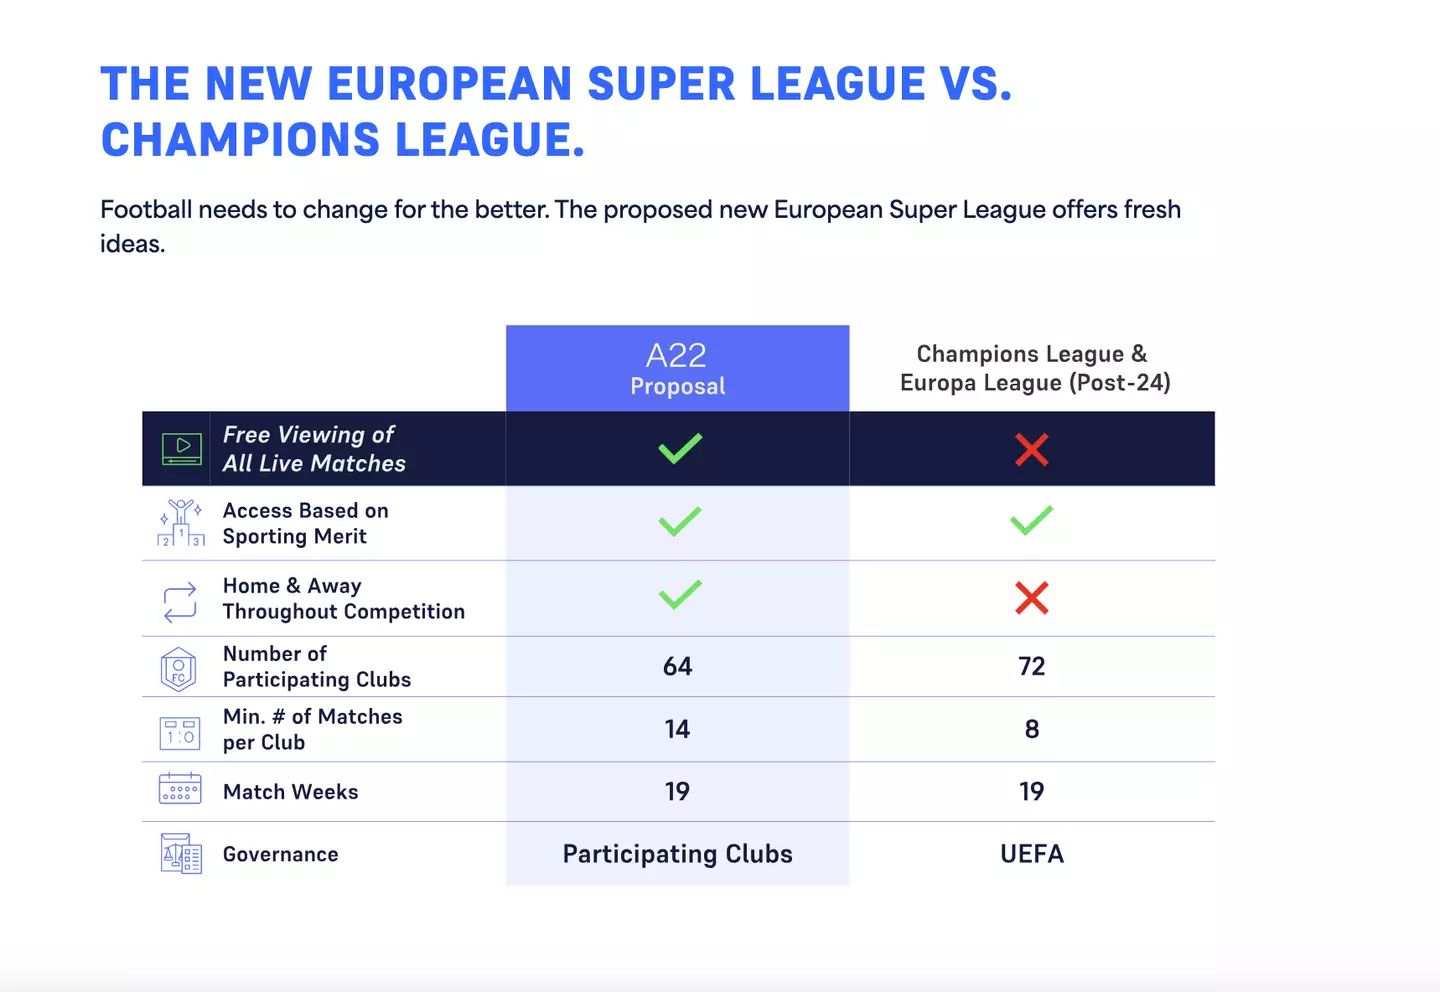 A22 claim the proposed new European Super League offers "fresh ideas". Image credit: A22